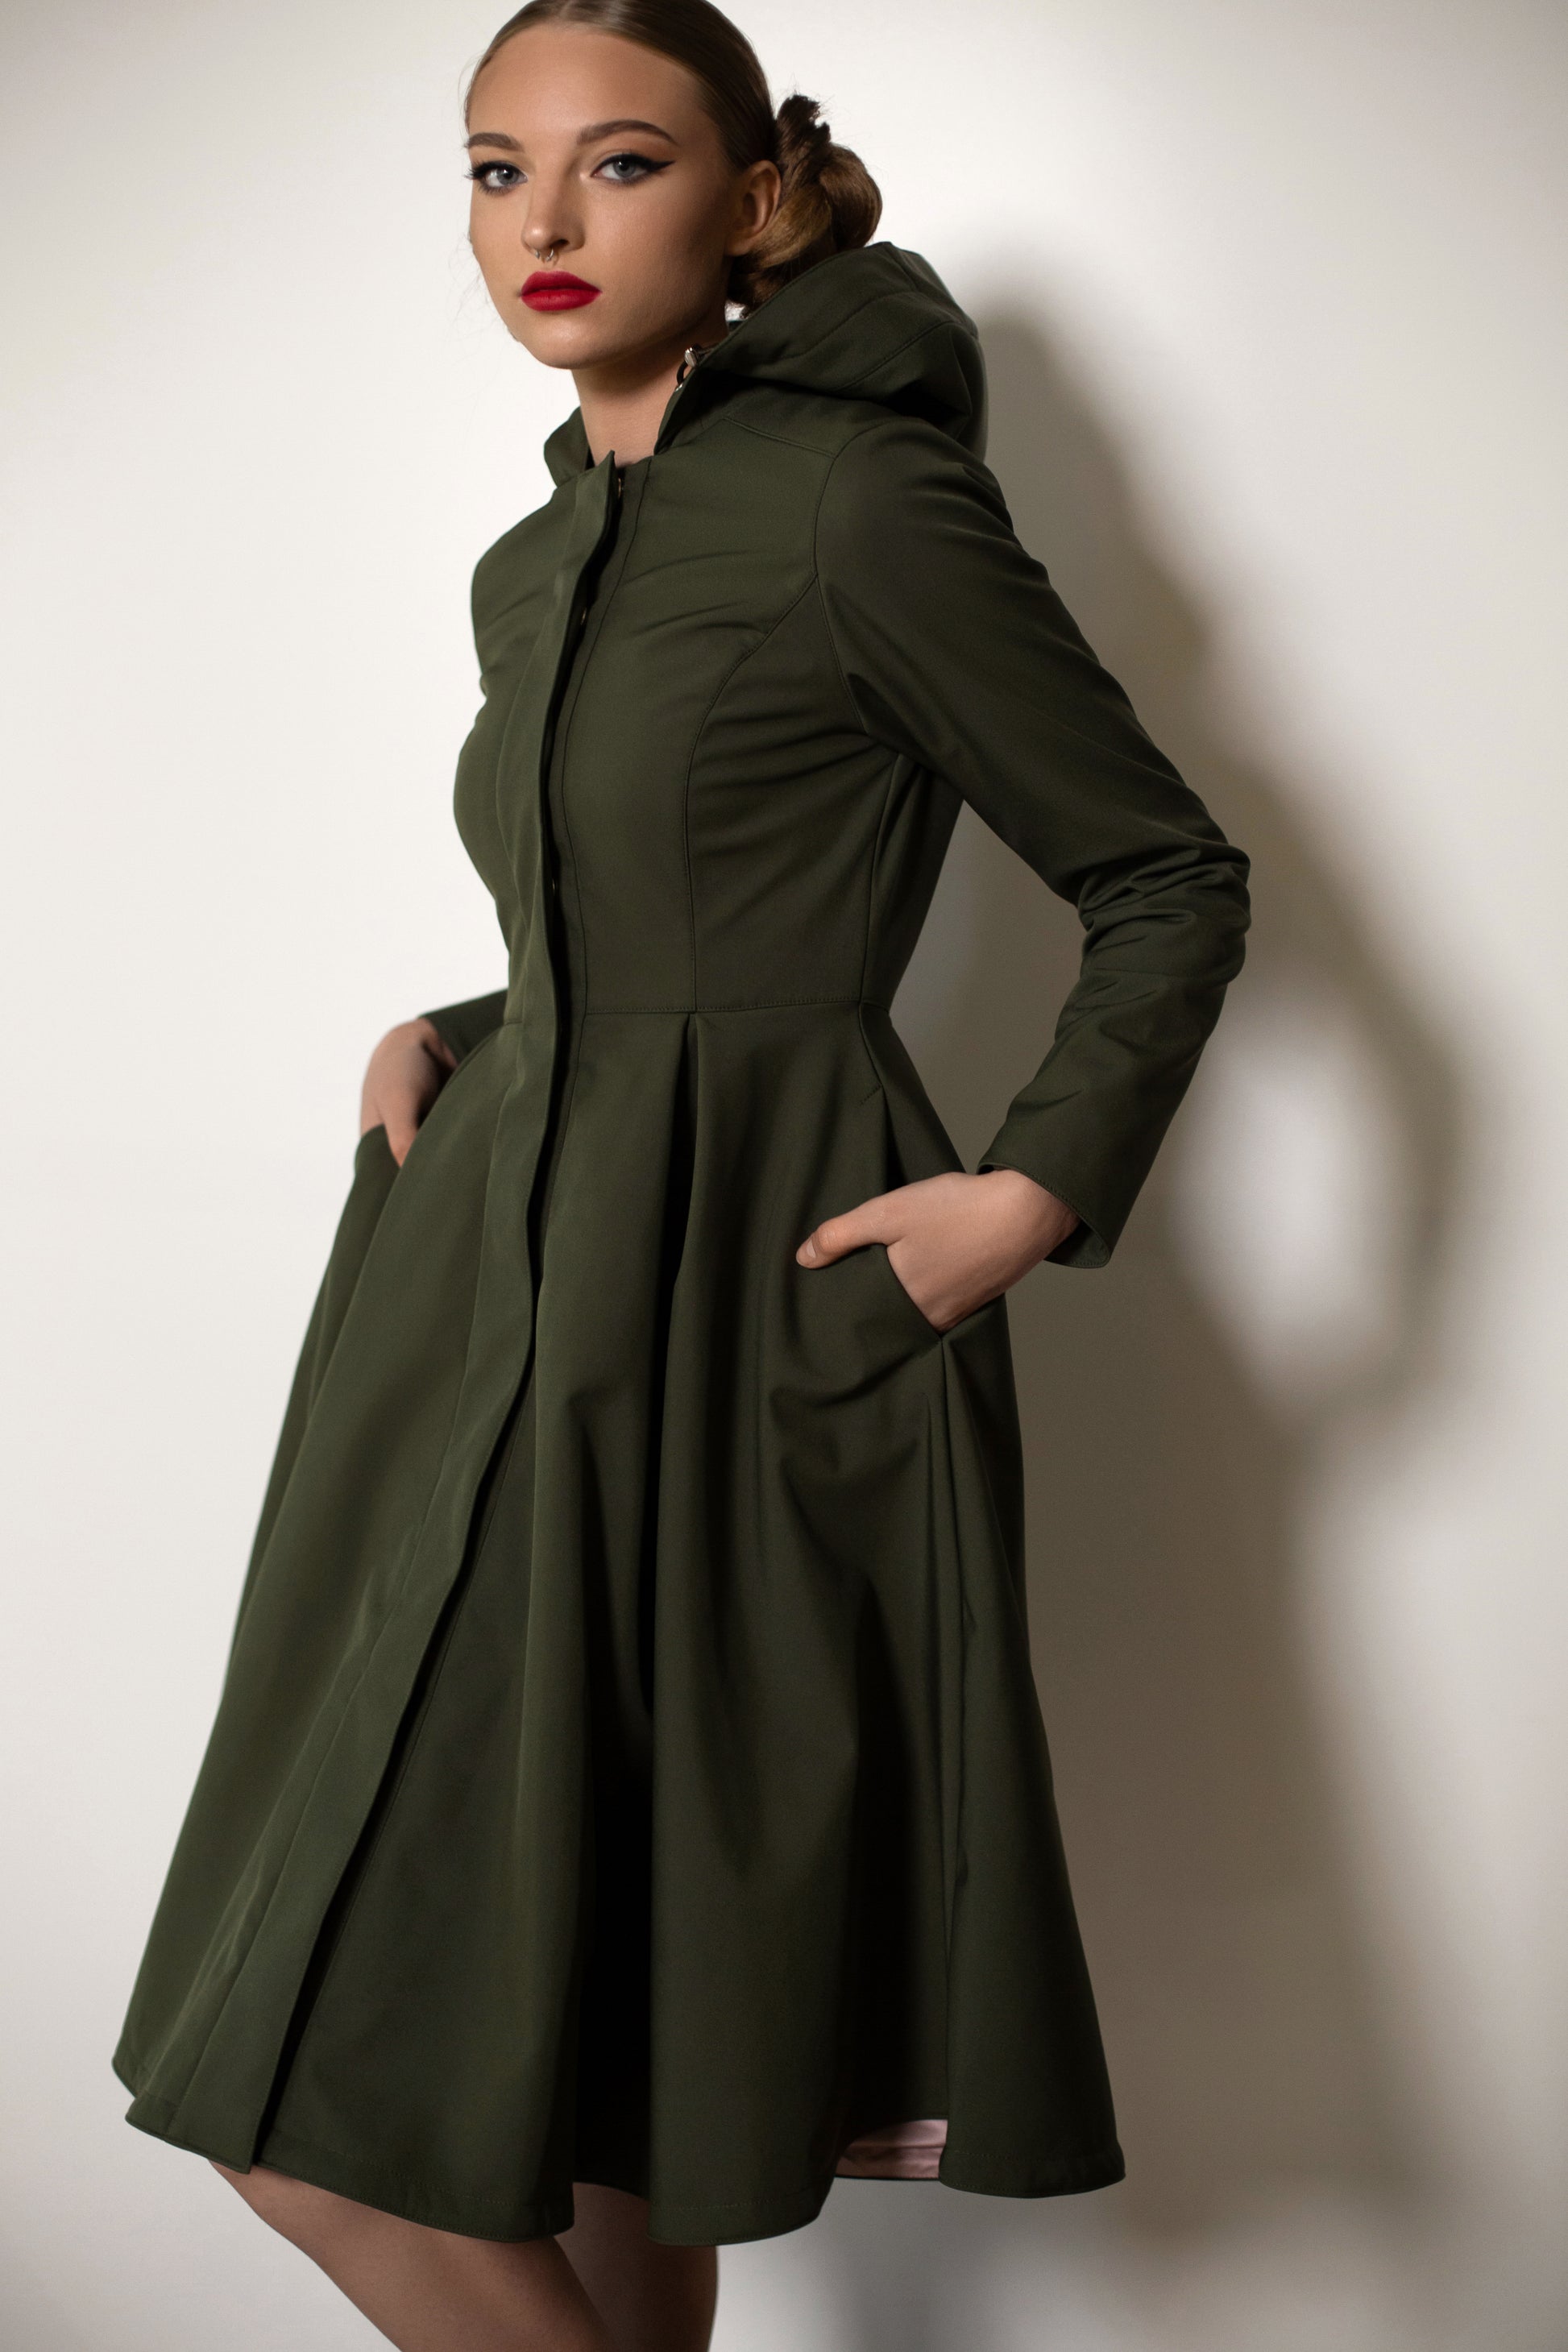 fitted and flared green women's coat with pleated skirt part